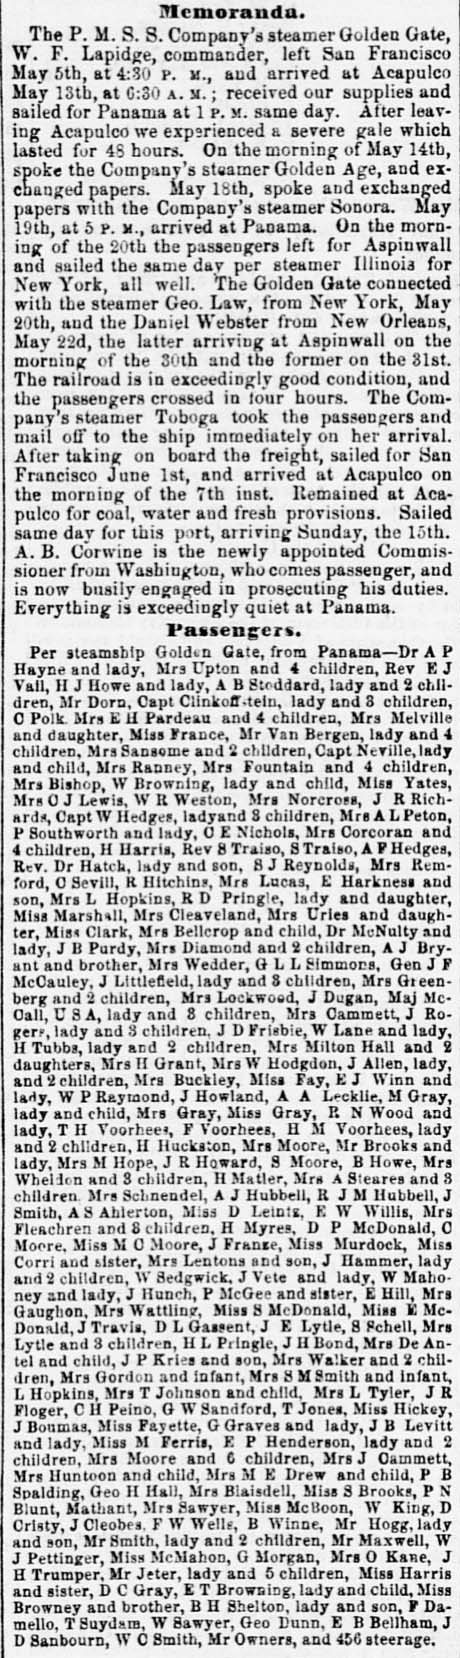 Passengers by the SS Golden Gate June 16, 1856, Sacramento Daily Union.